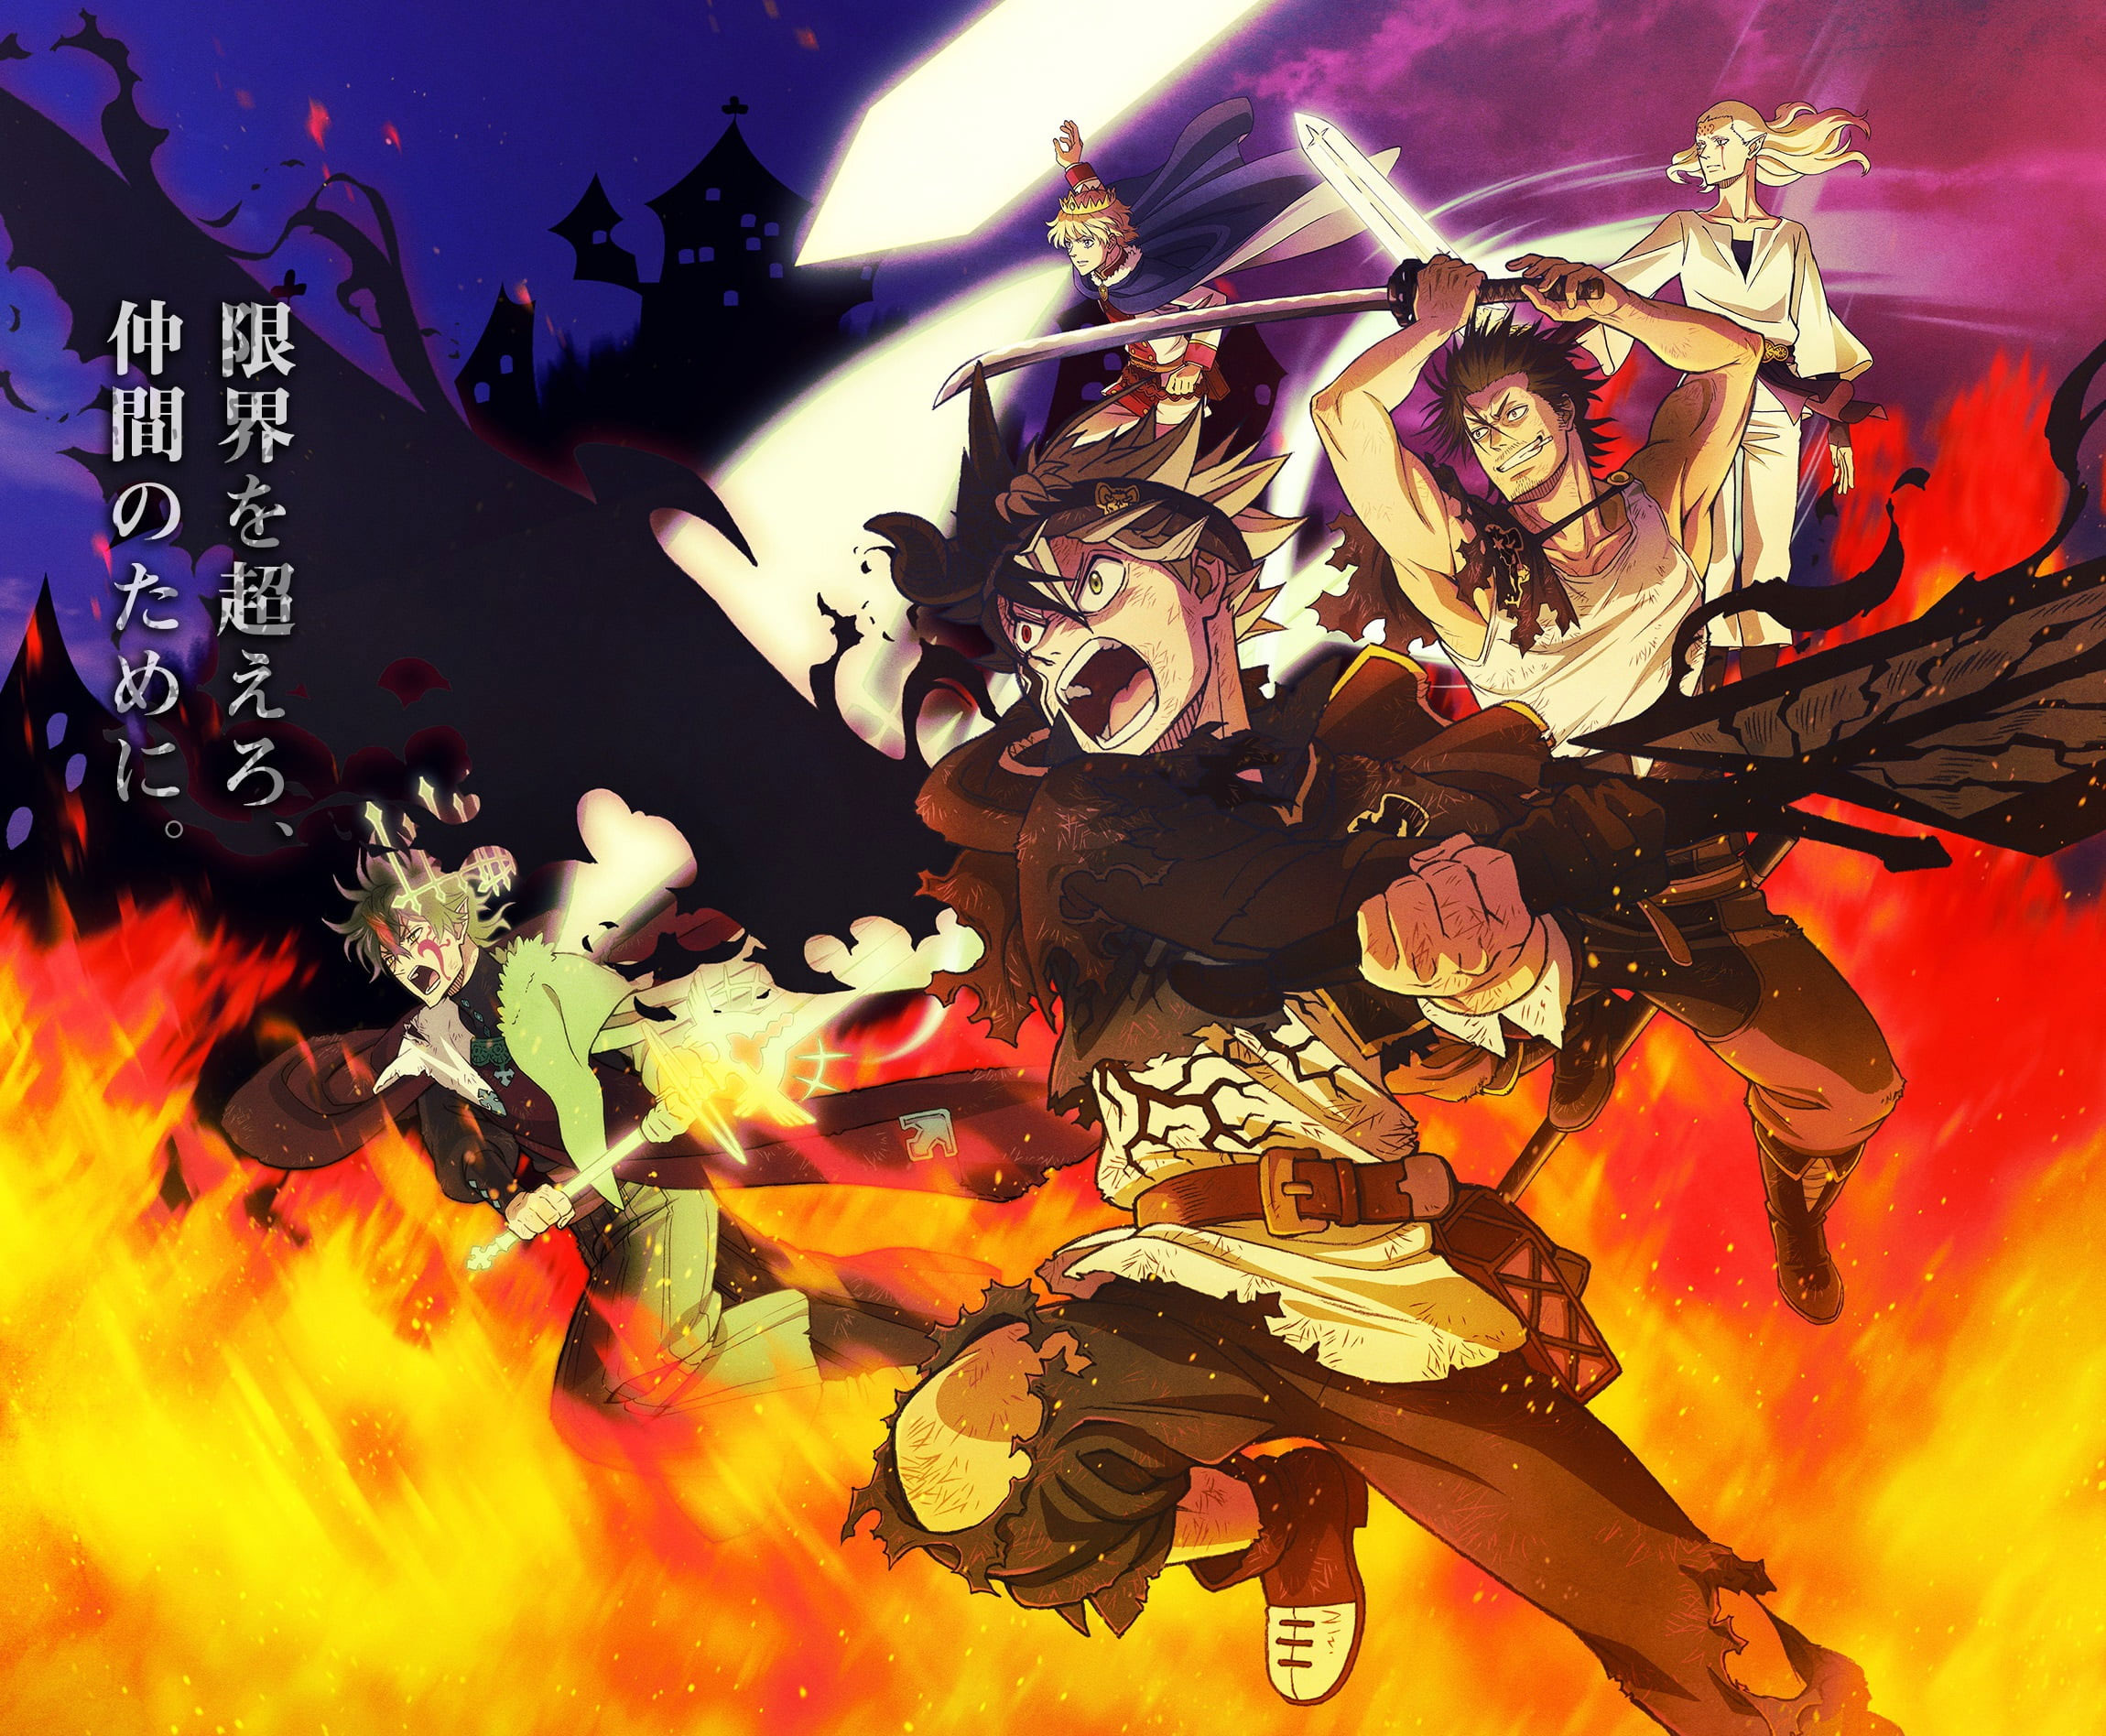 Yami Black Clover Wallpapers